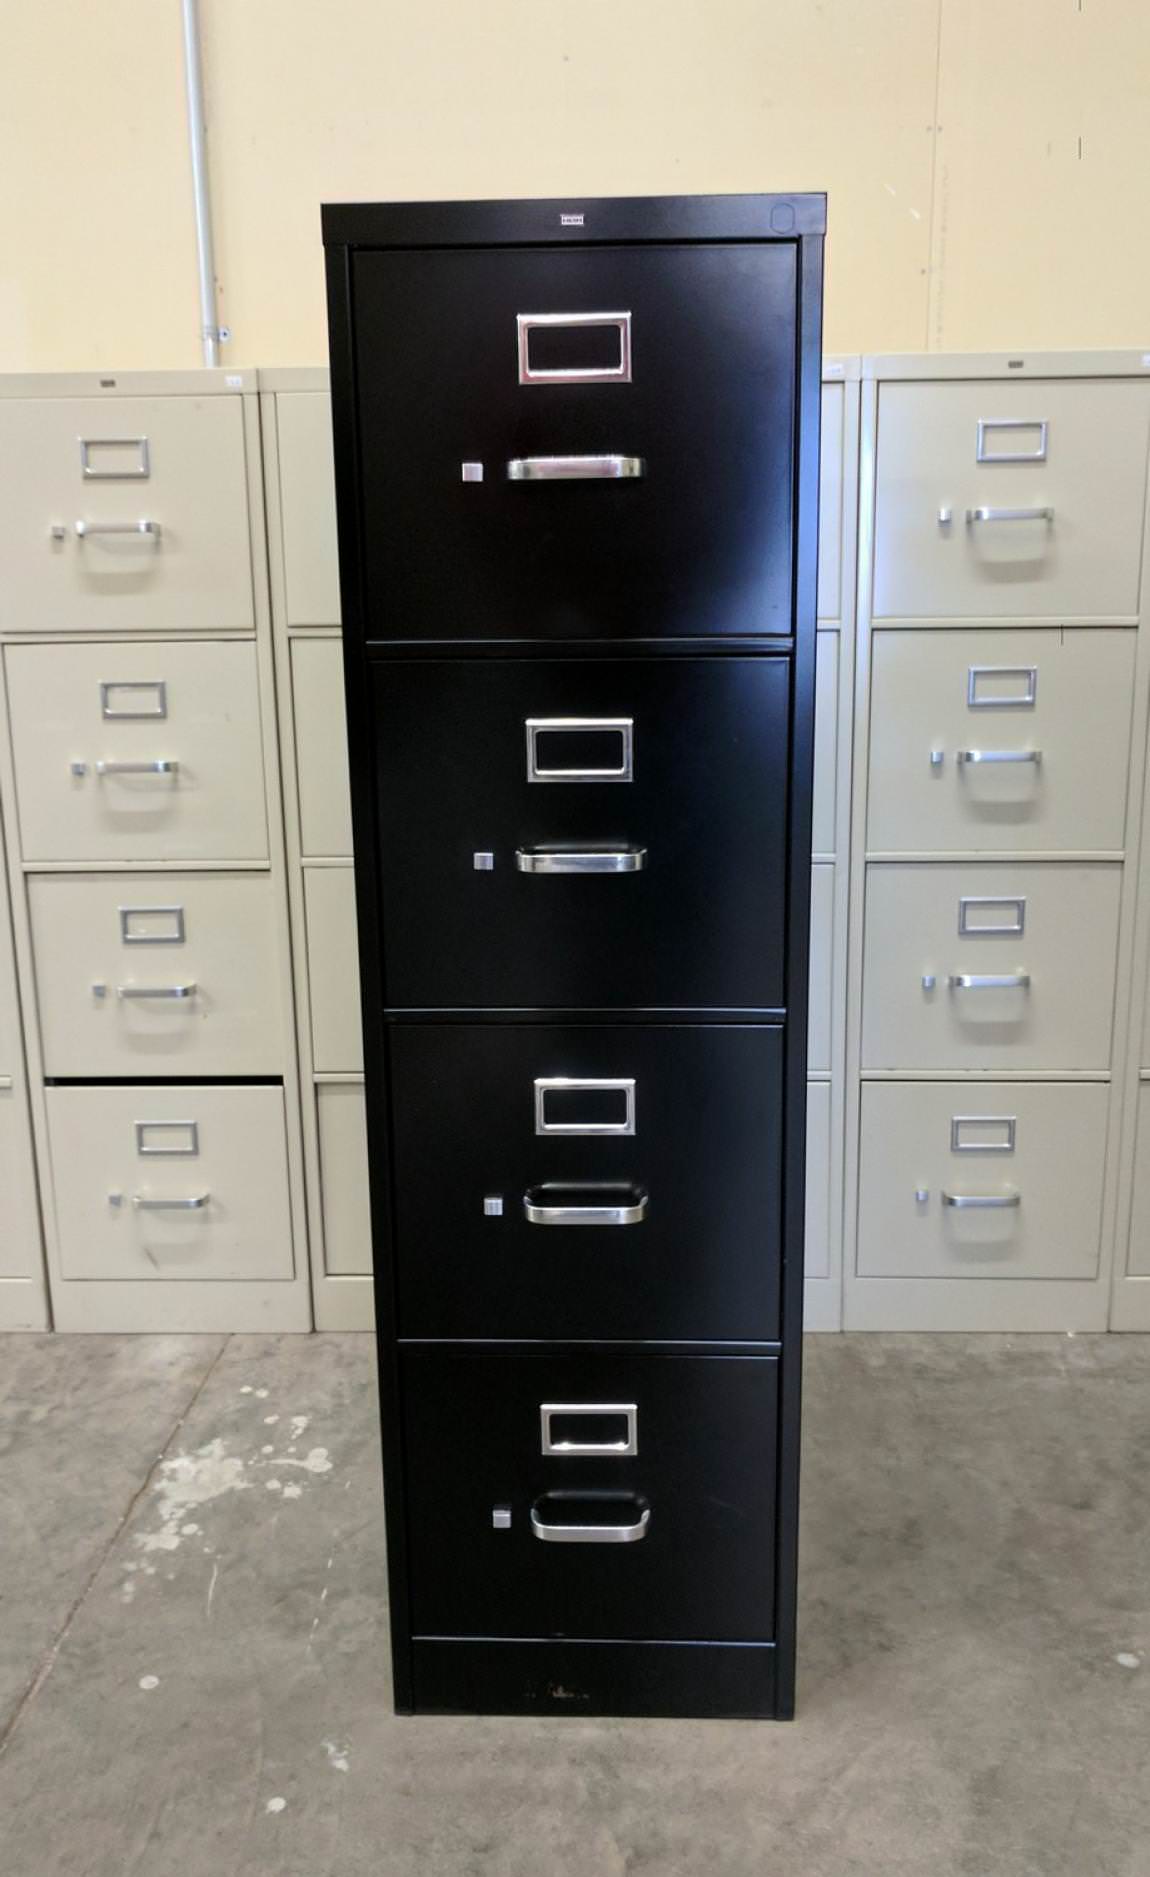 Hahn File Cabinets | Cabinets Matttroy